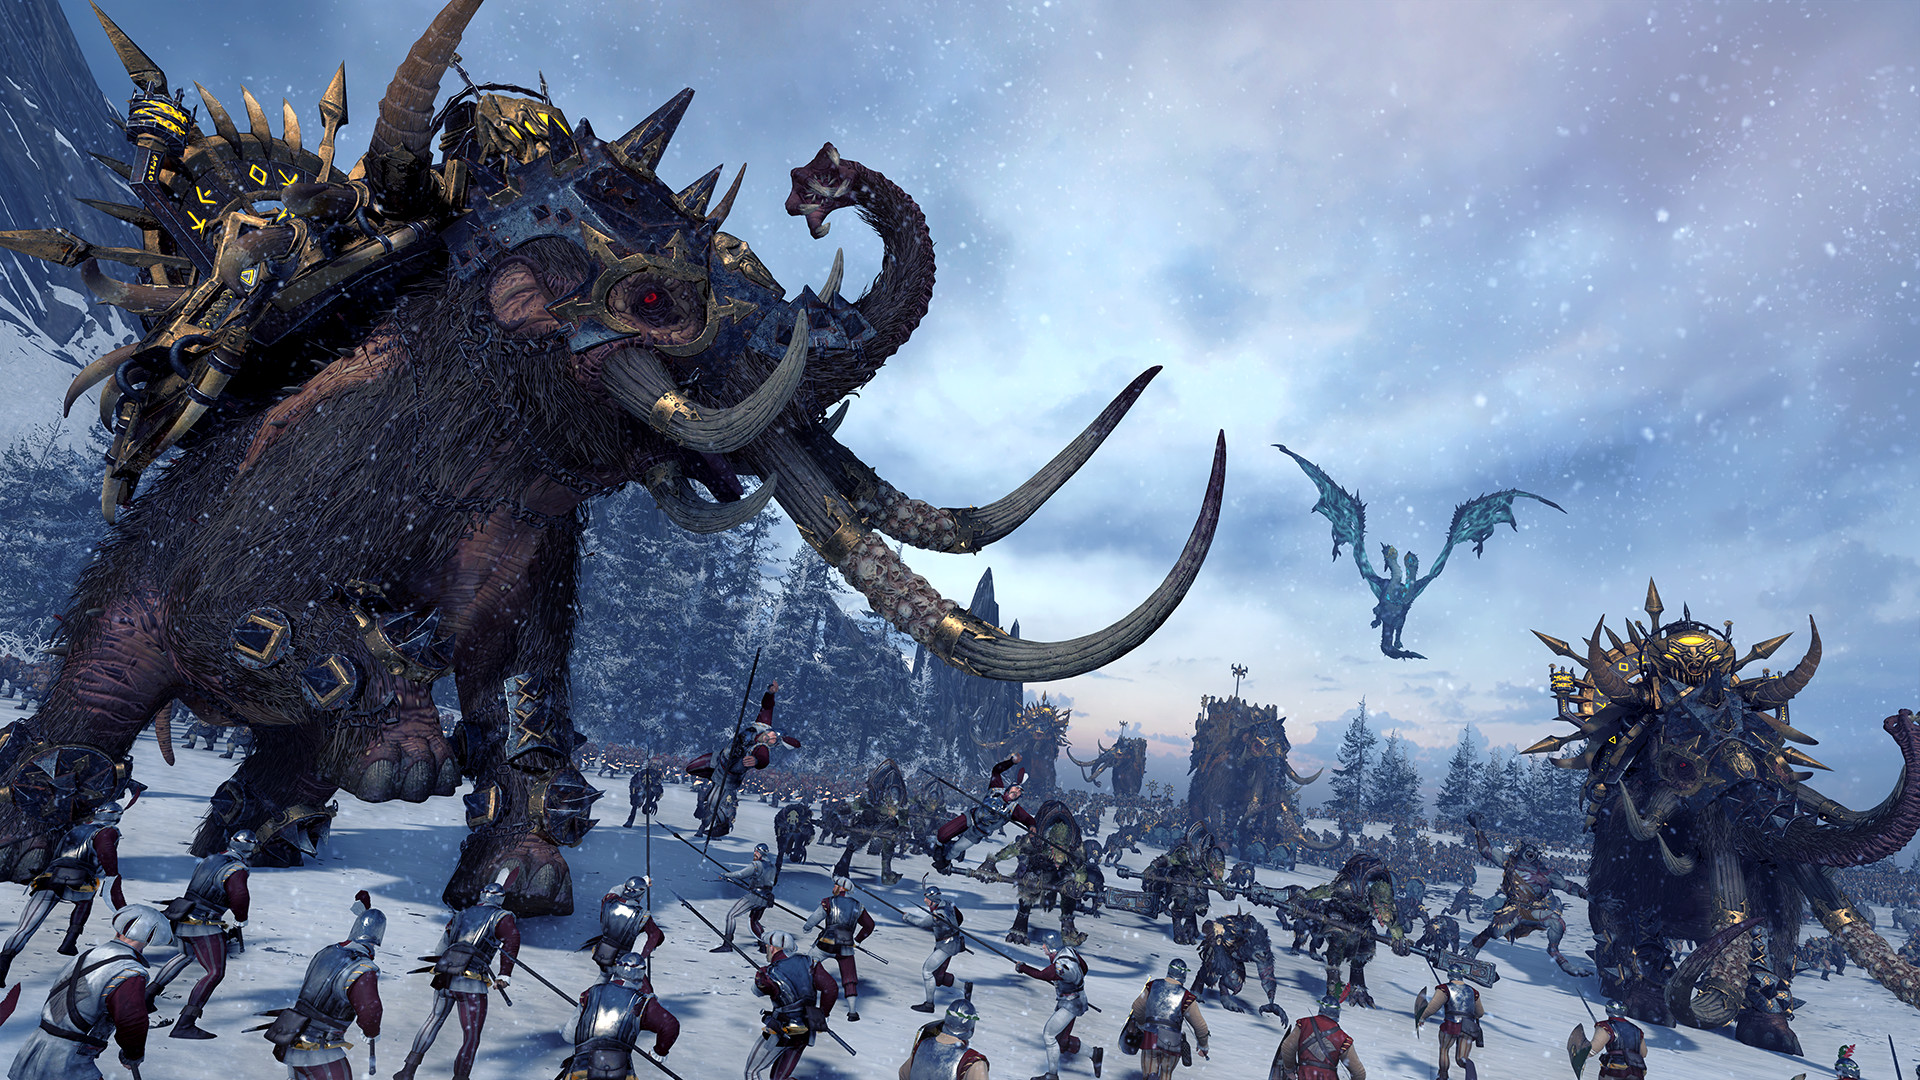 total war warhammer norsca sould i play 1 or wait